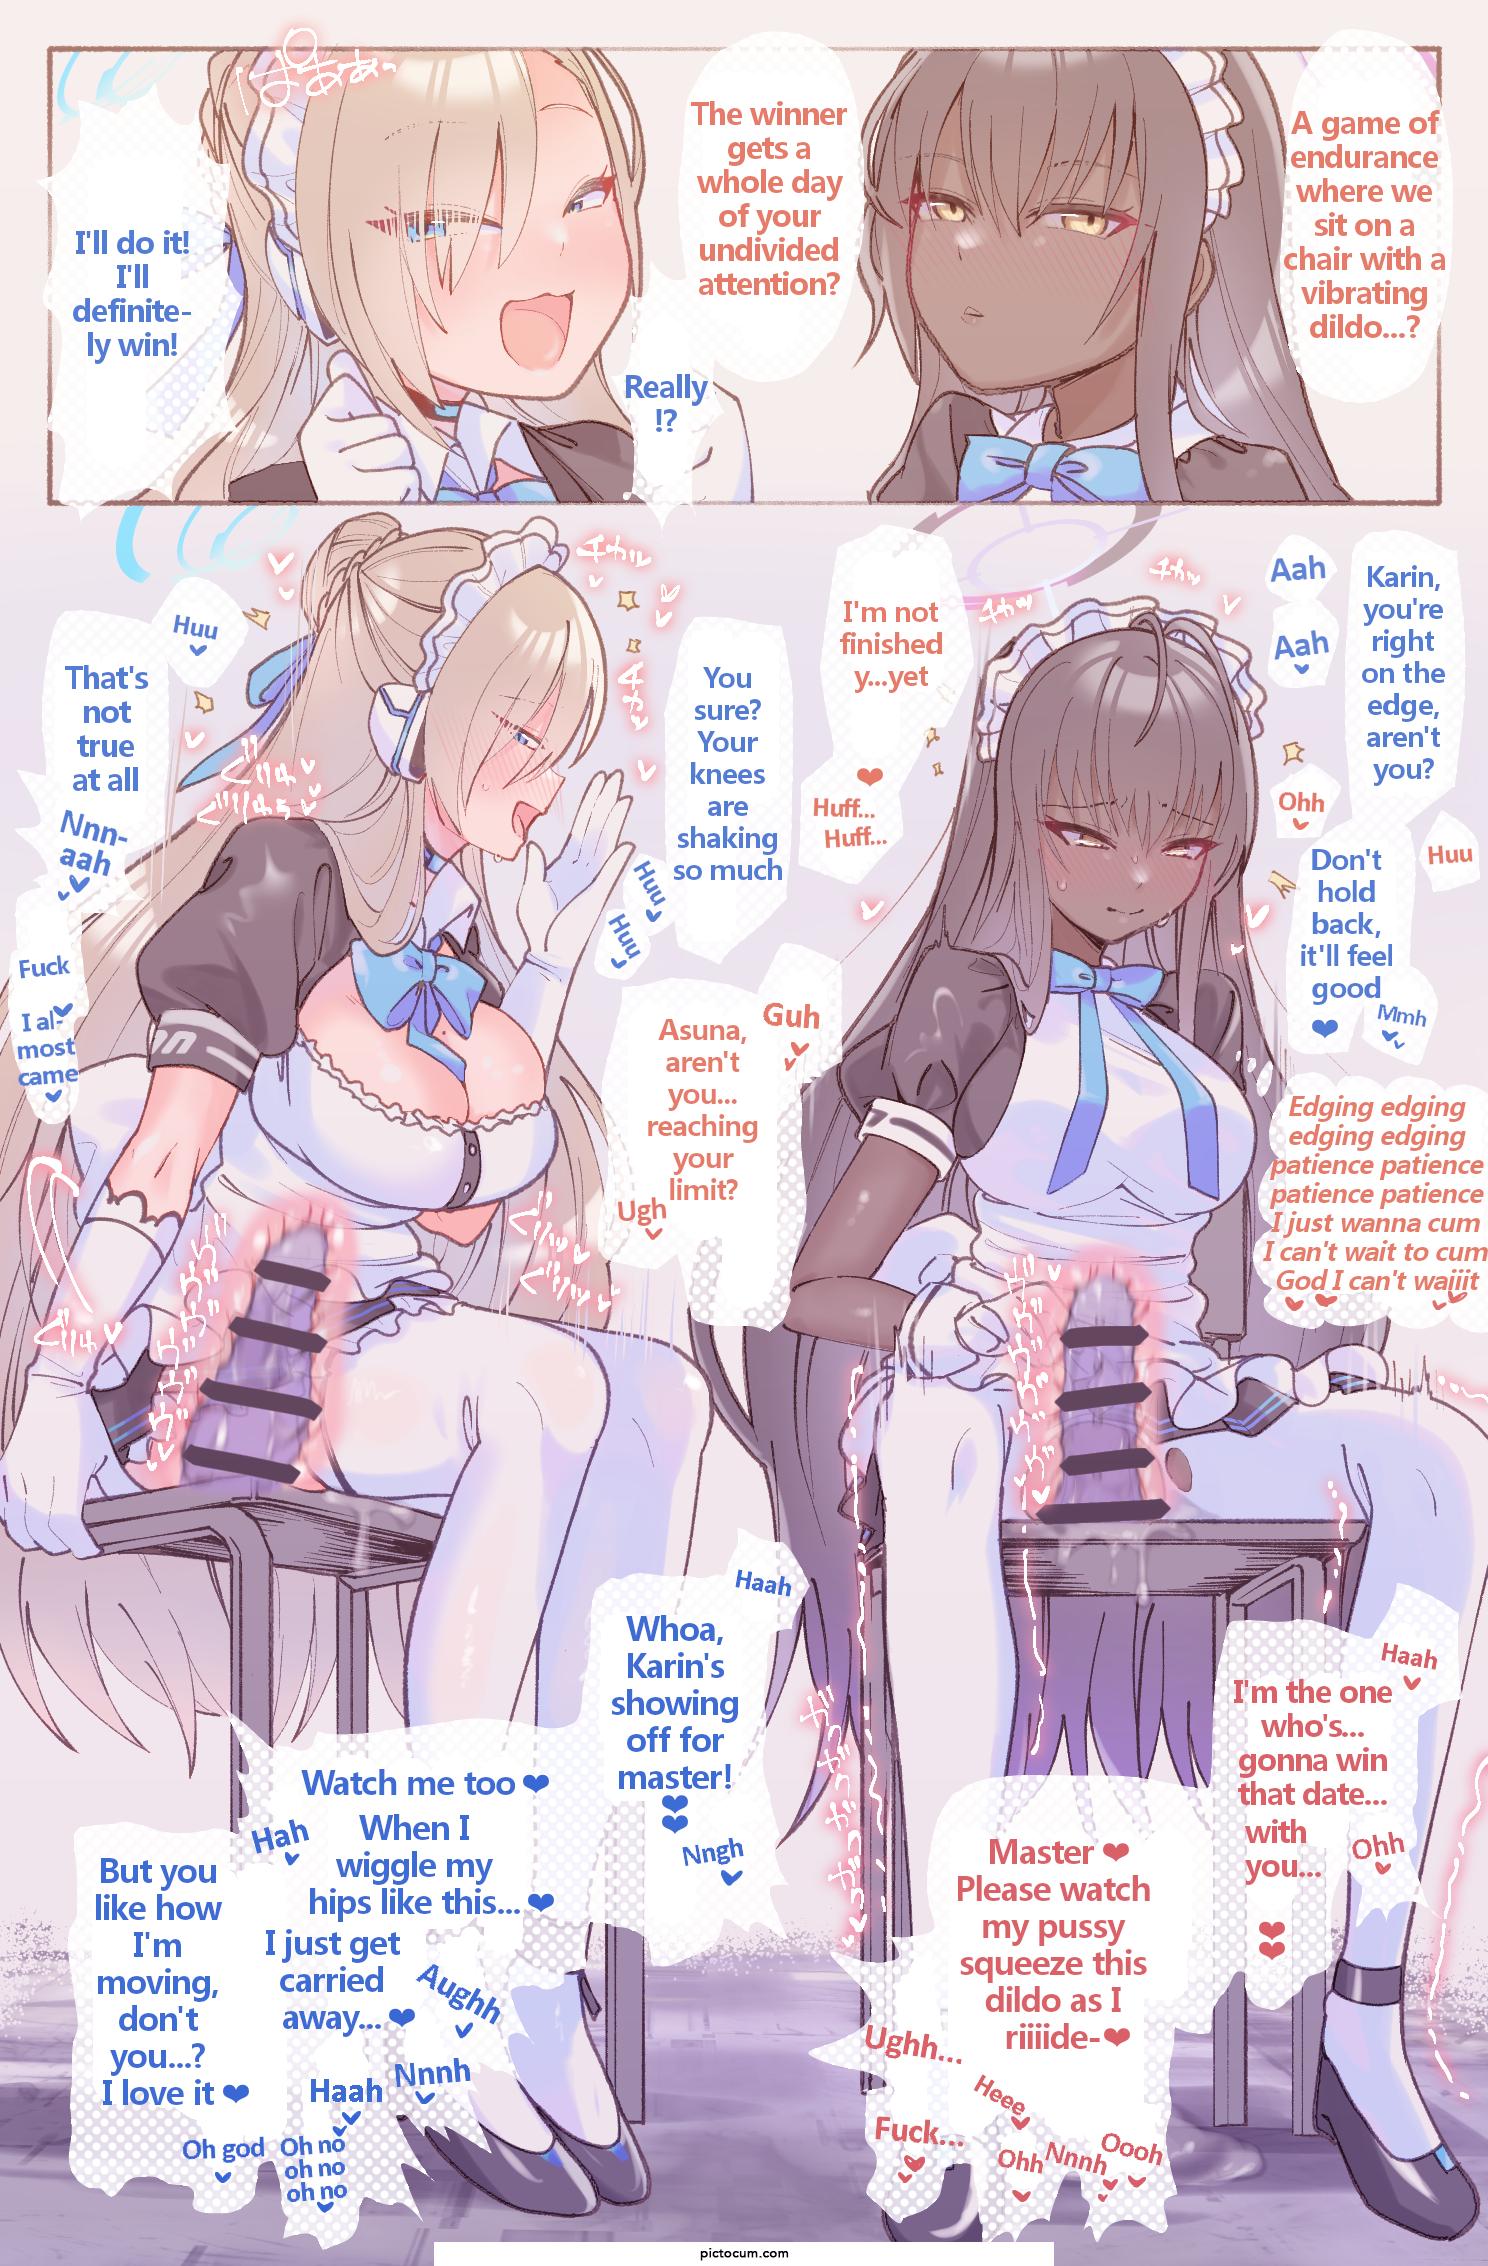 Testing the maids